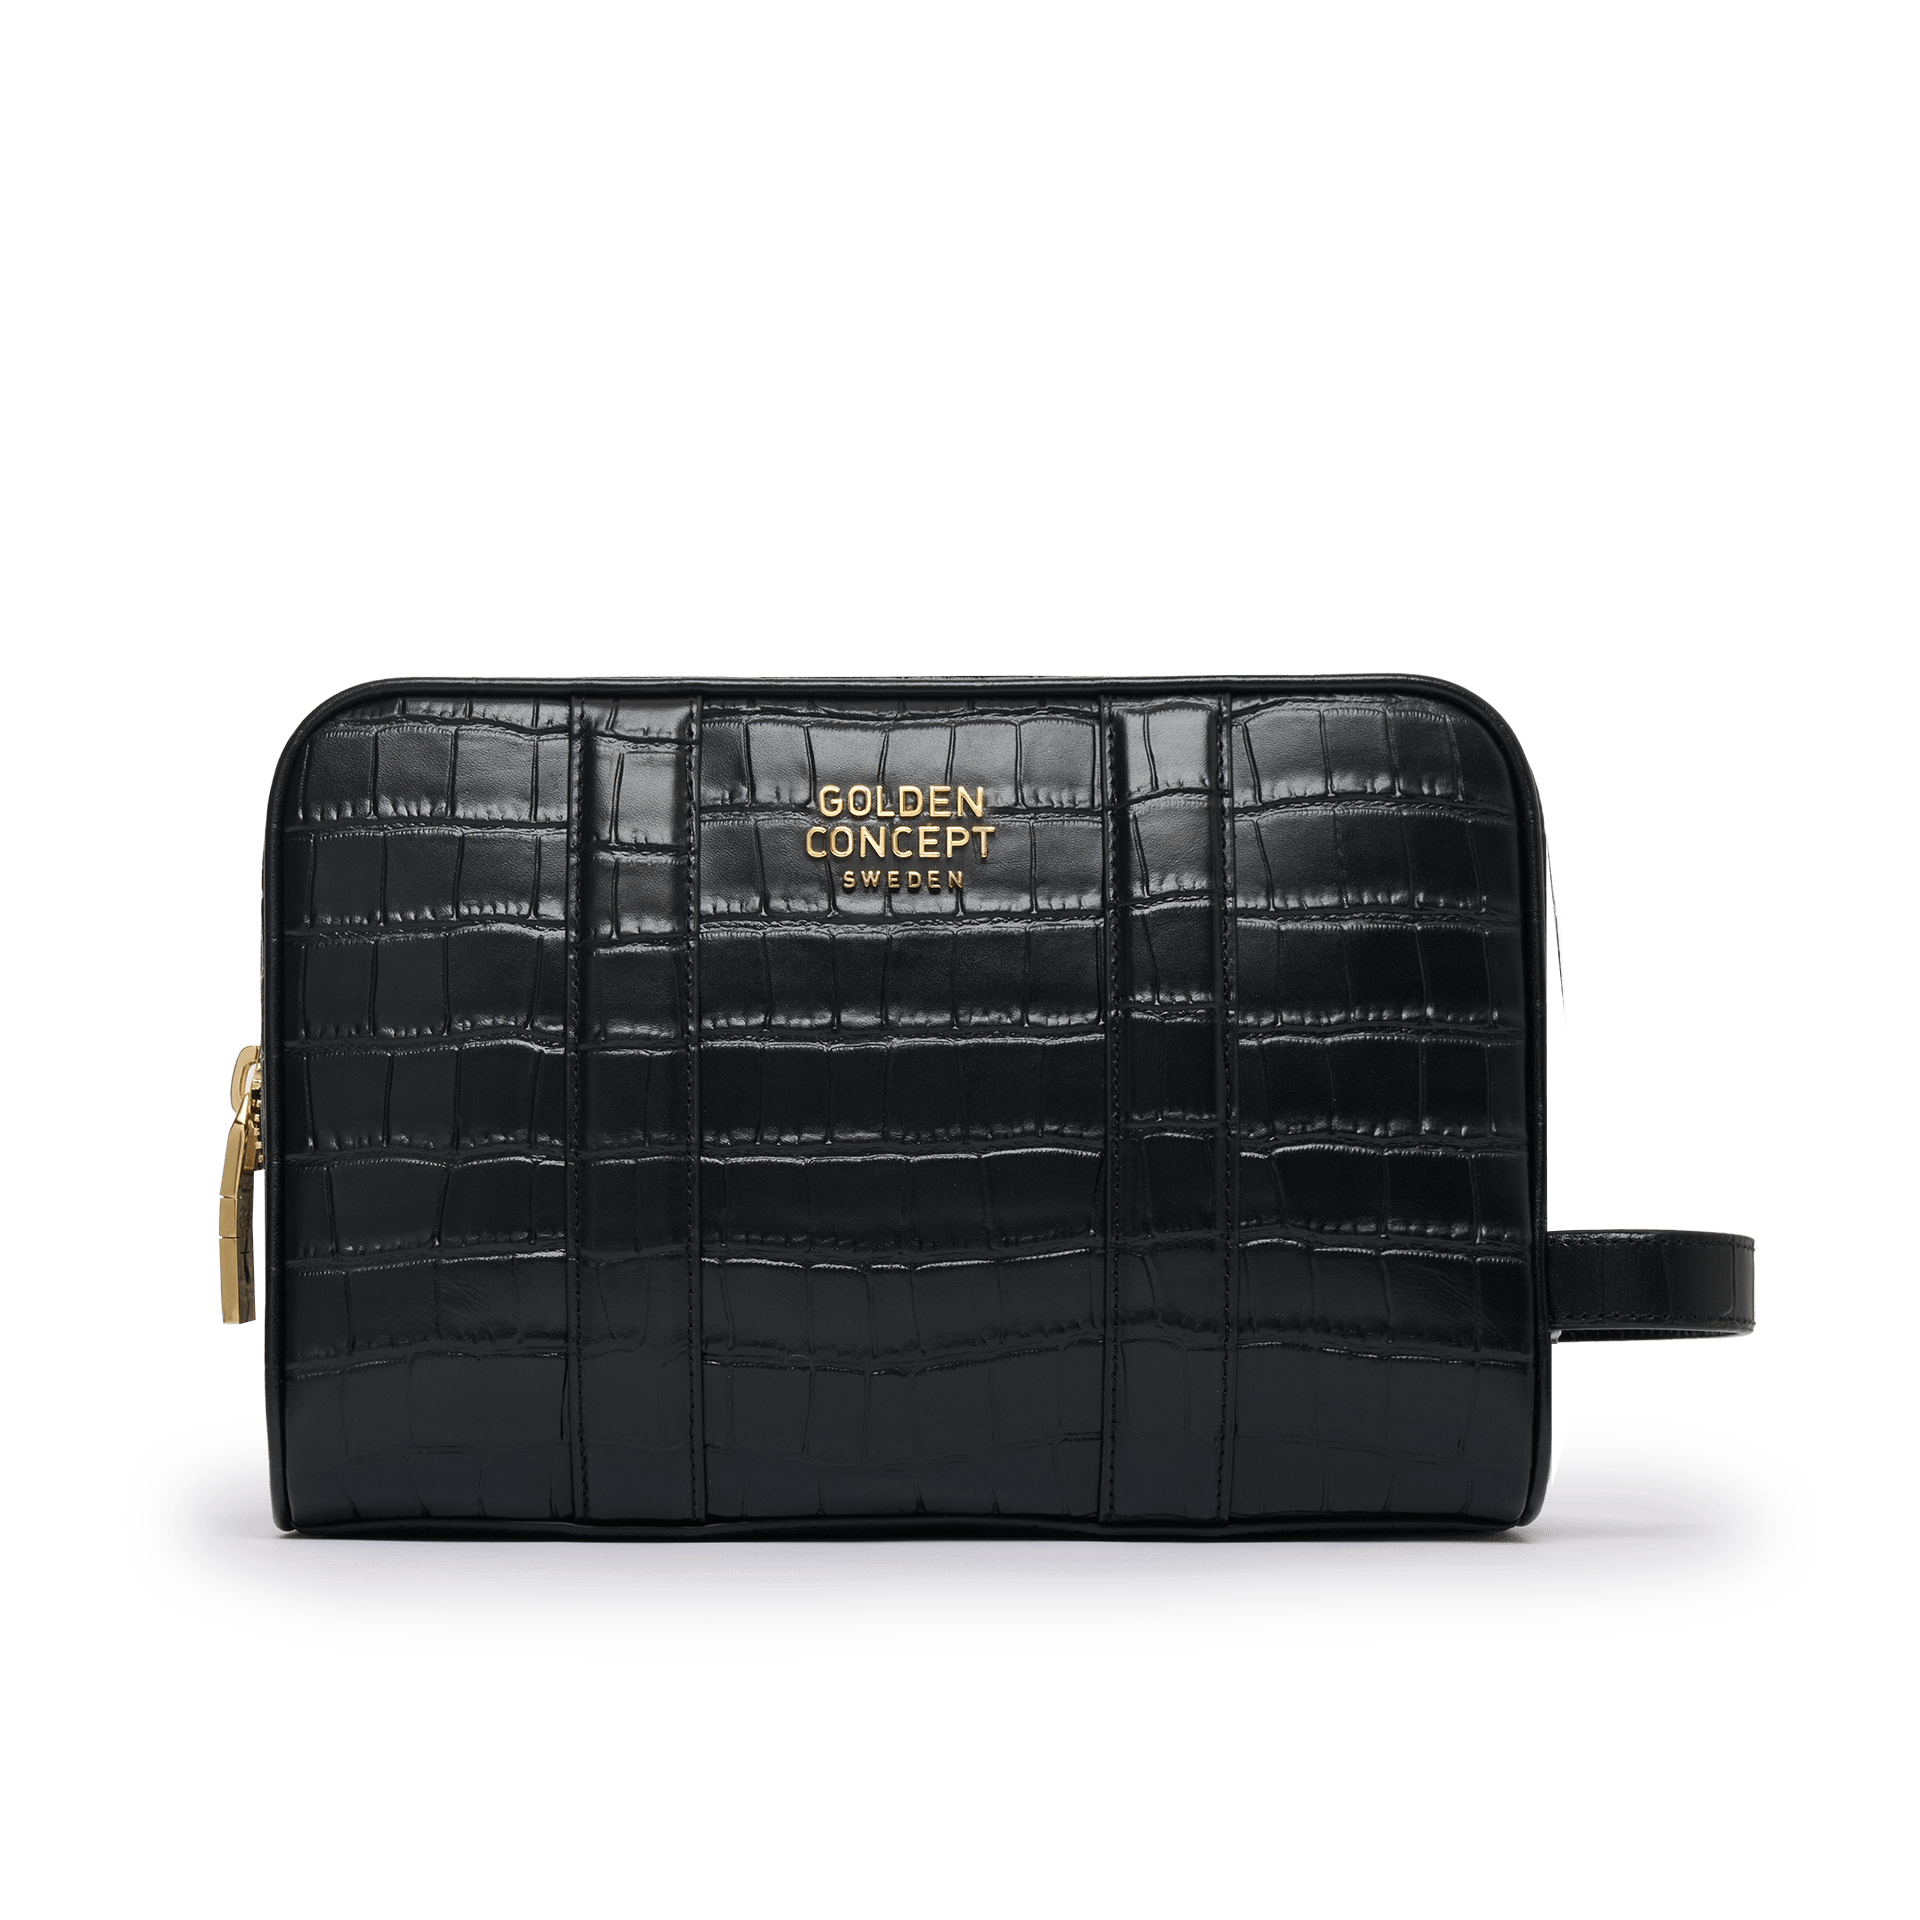 Golden Concept - Leather Accessories - Toiletry Bag - Croco Embossed - Large